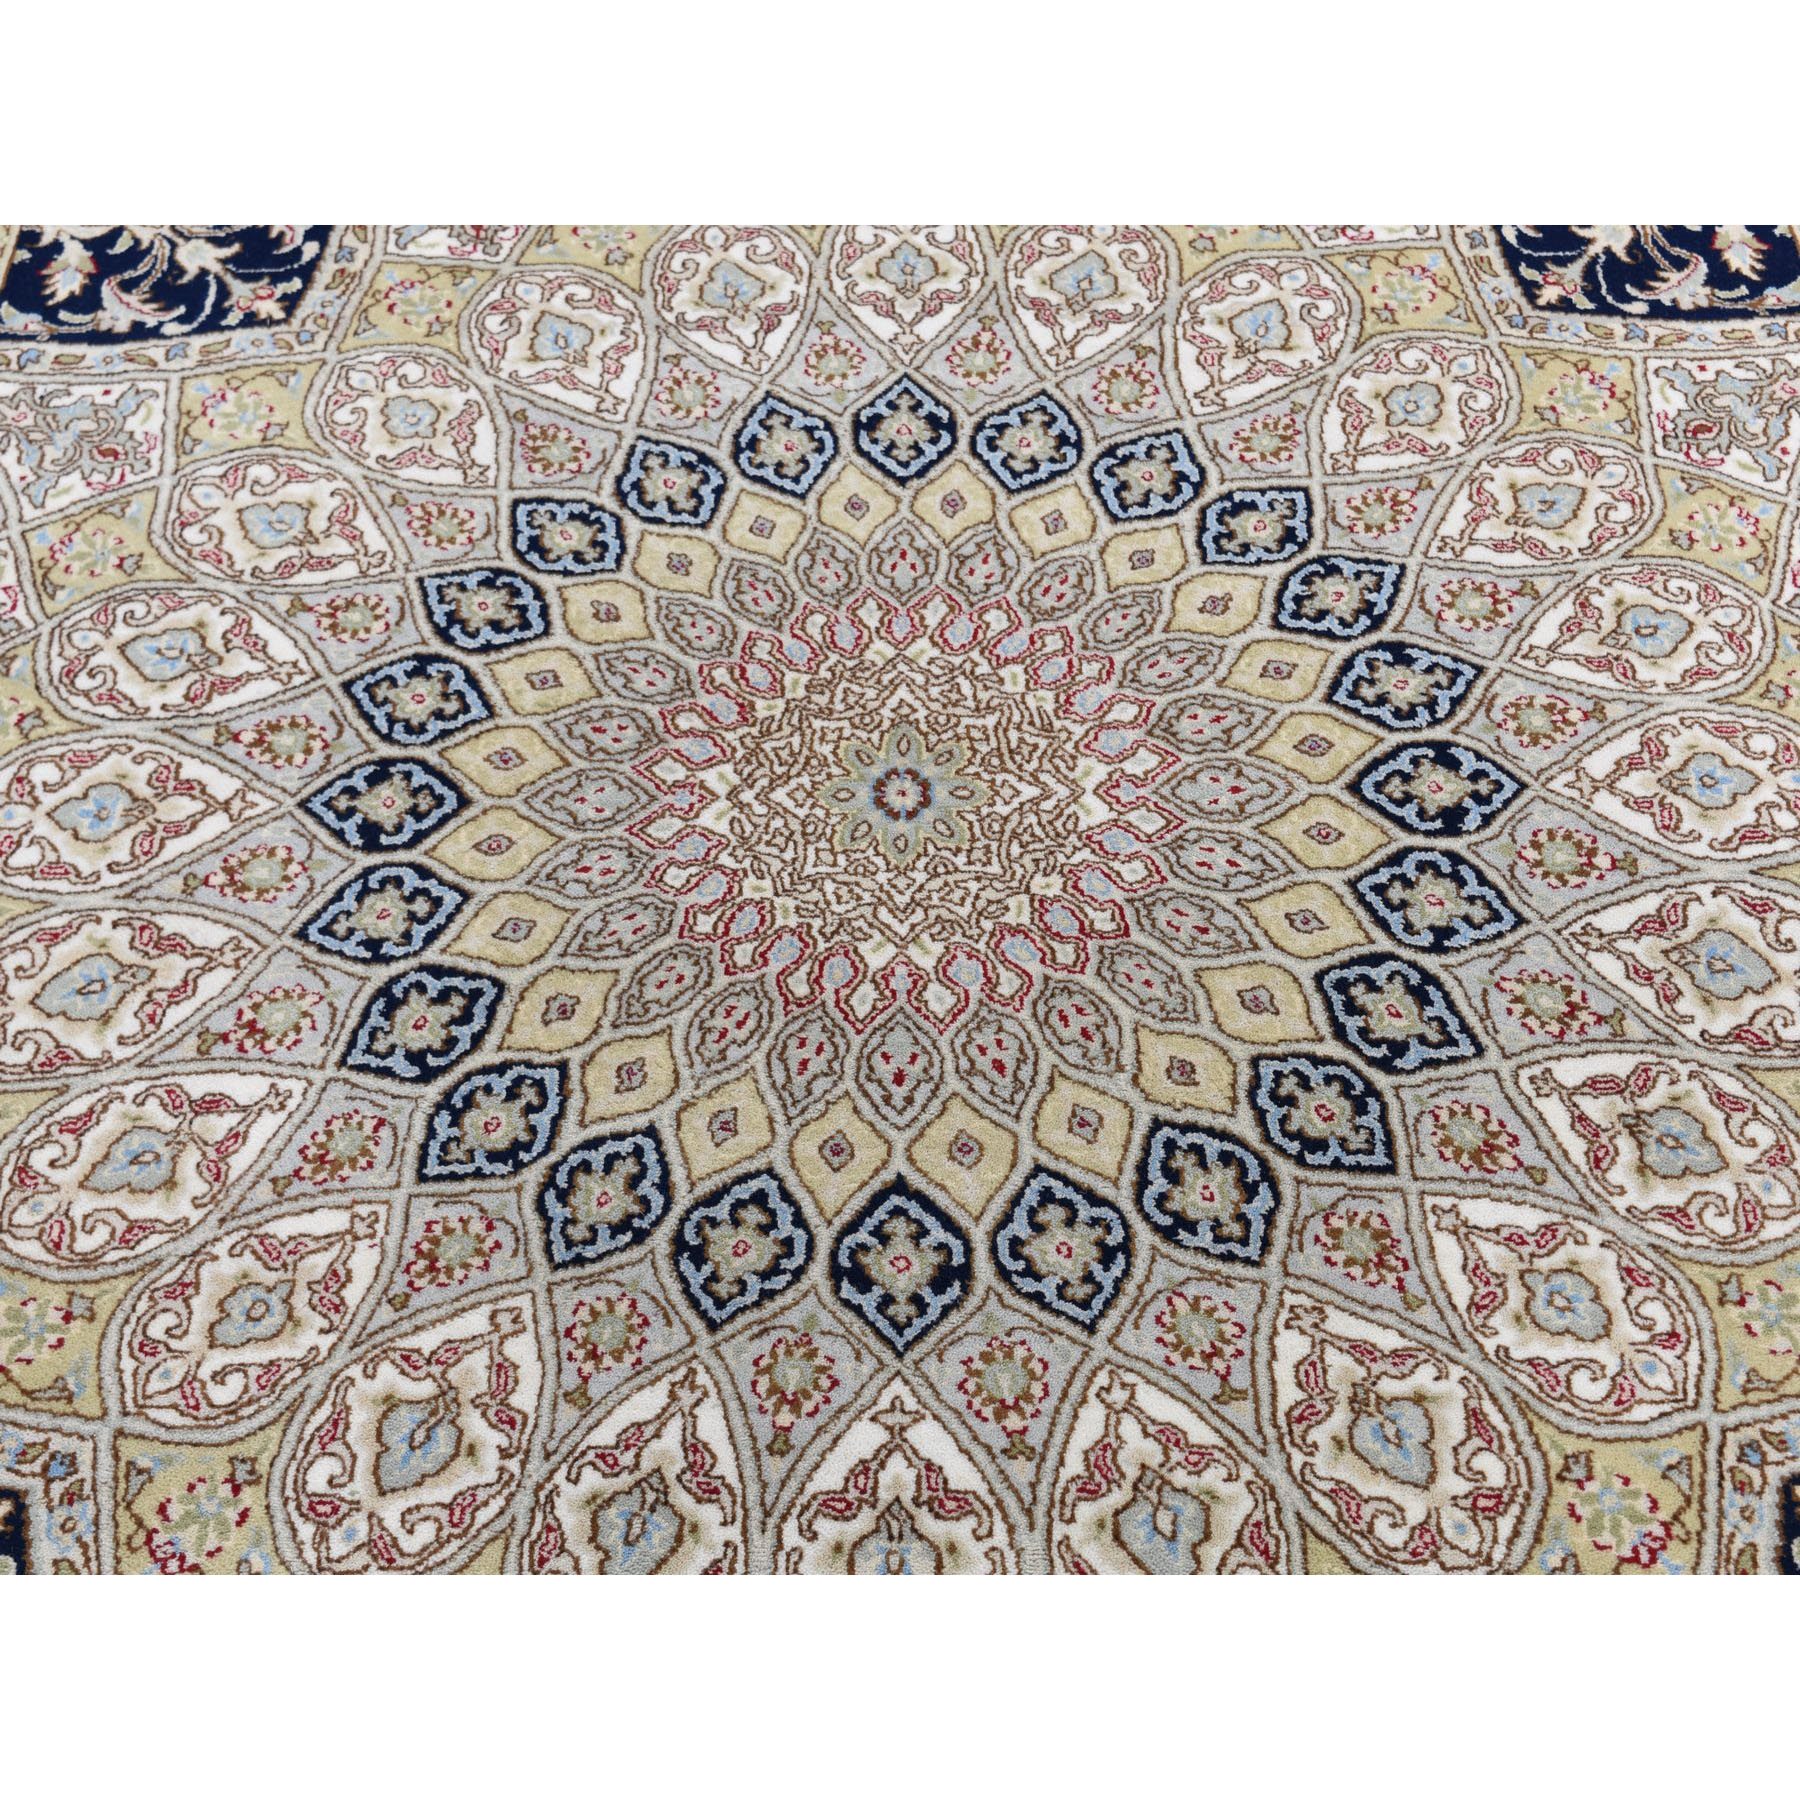 6-x9- Gray Nain With Gumbad Design Wool and Silk Hand Knotted Oriental Rug 